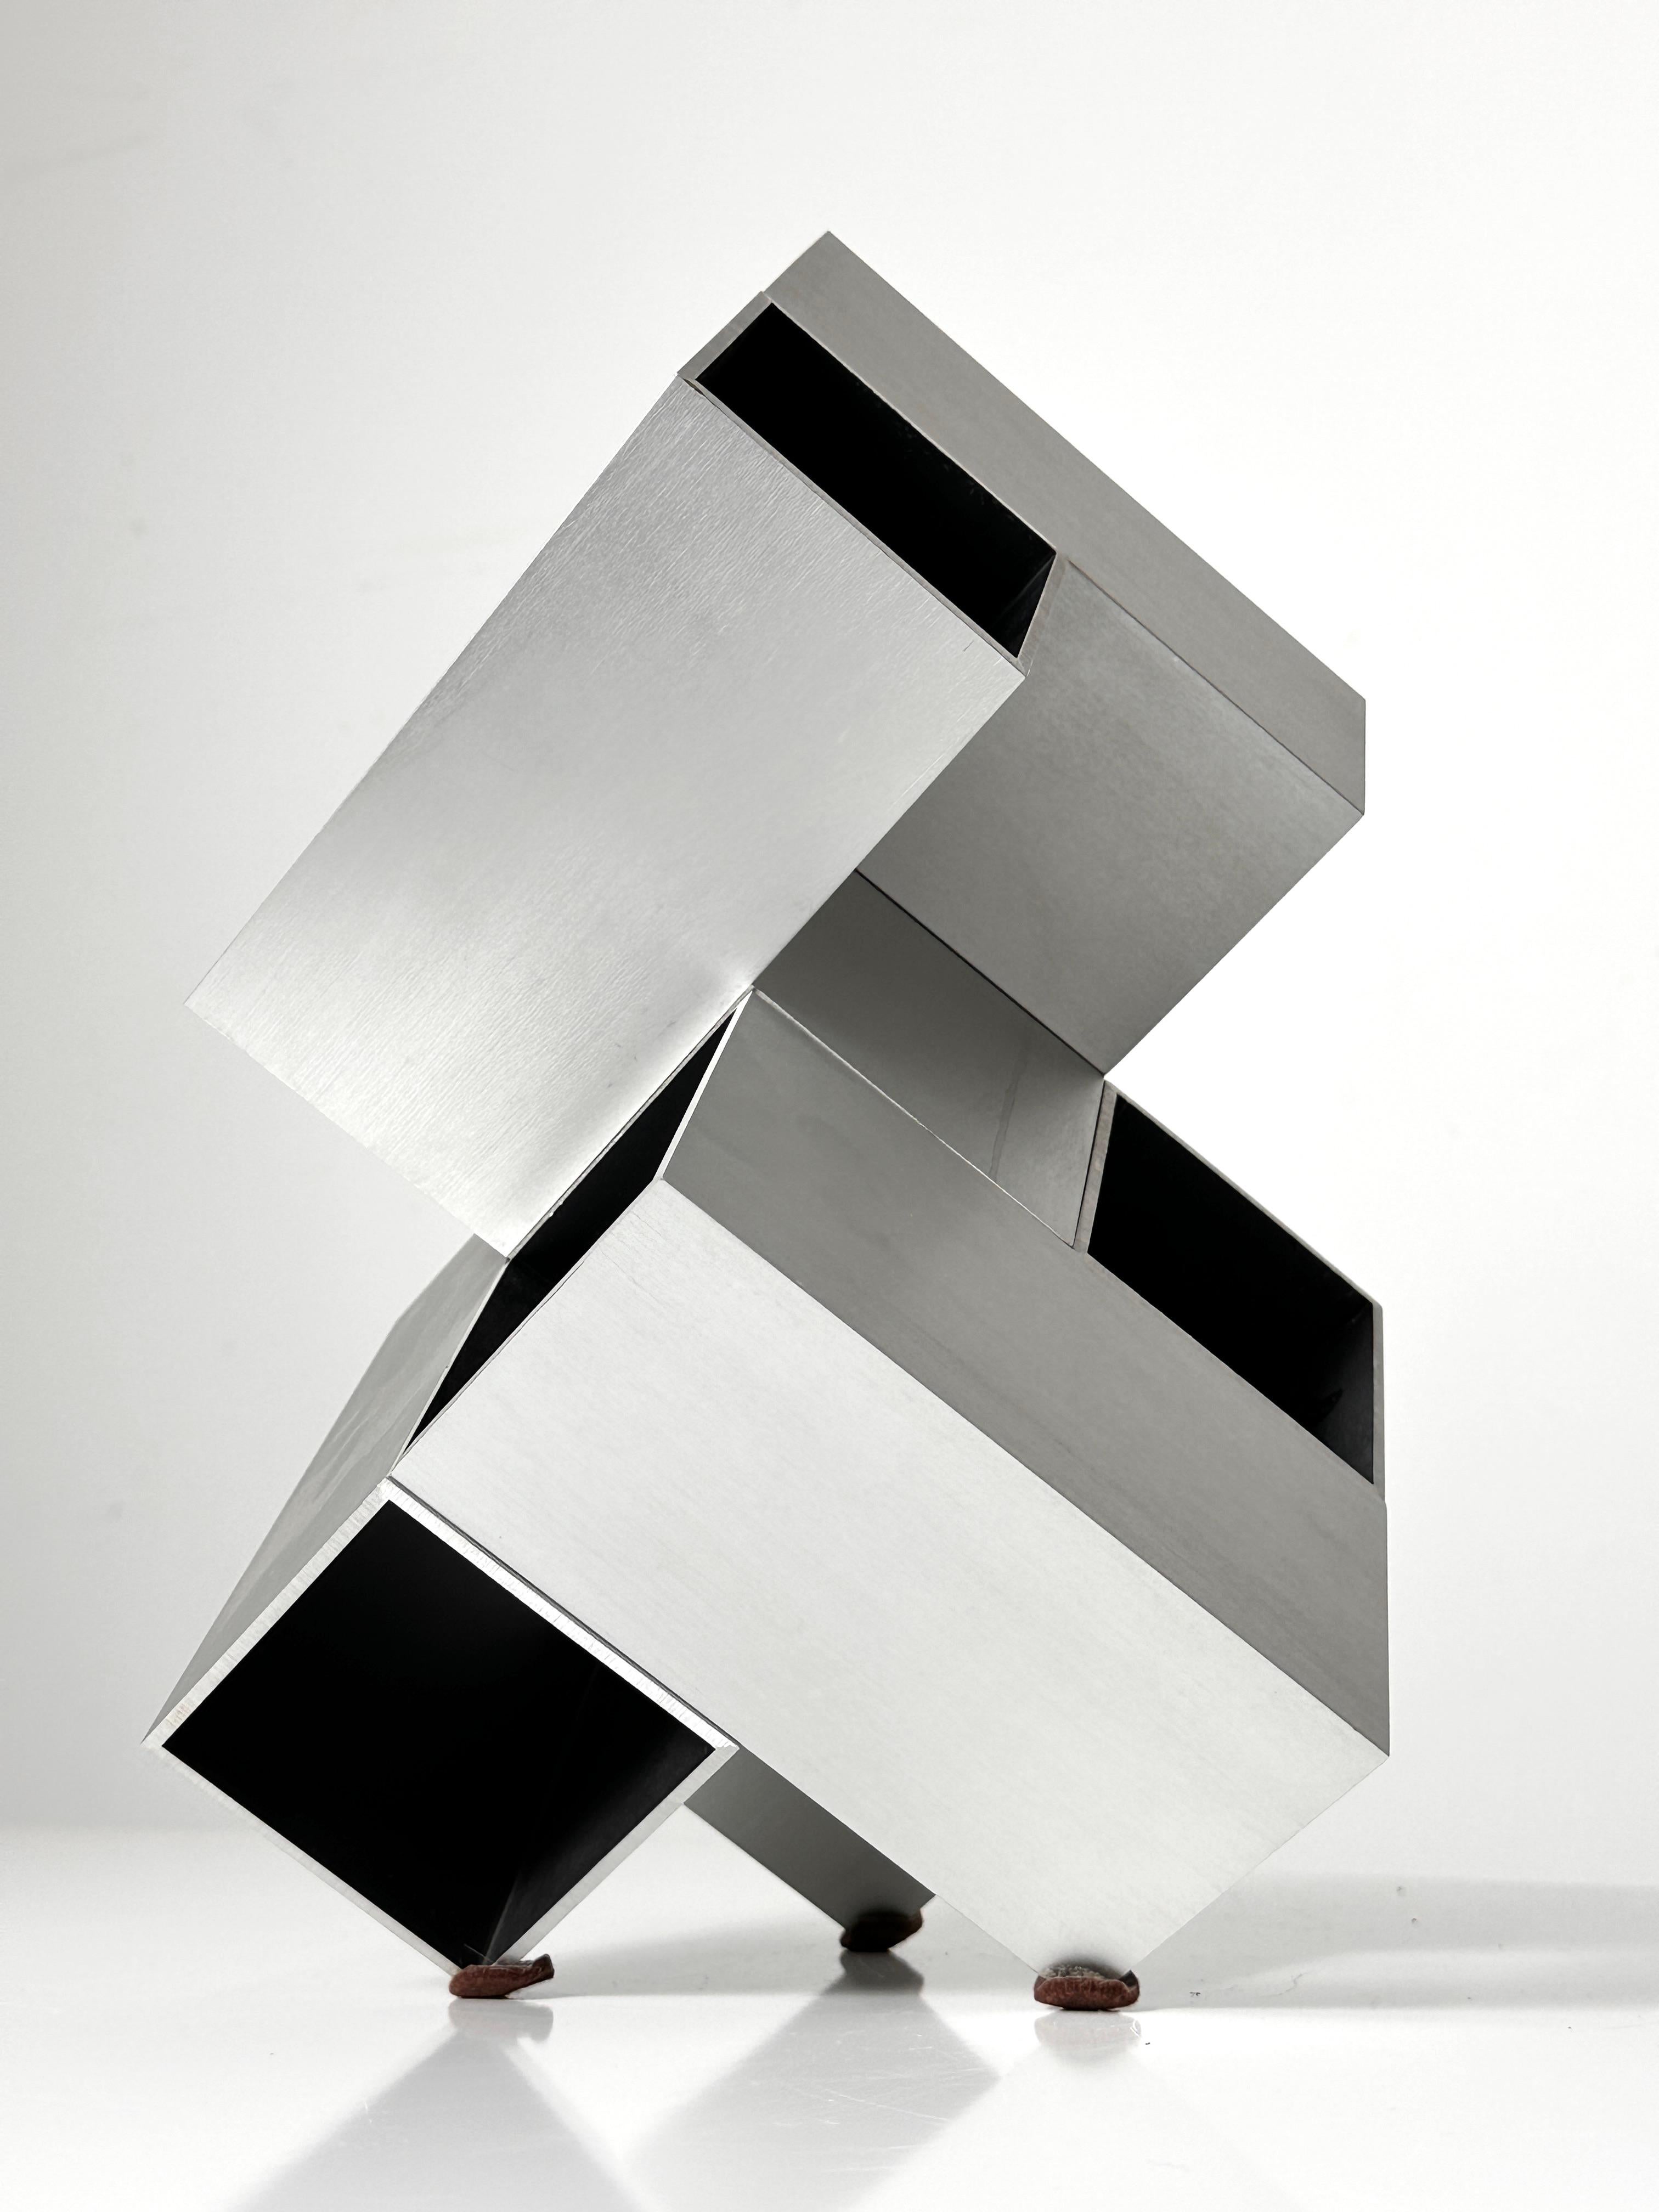 Canadian Modular Cube Sculpture by Kosso Eloul Israeli Artist 1920-1995 Toronto Canada  For Sale